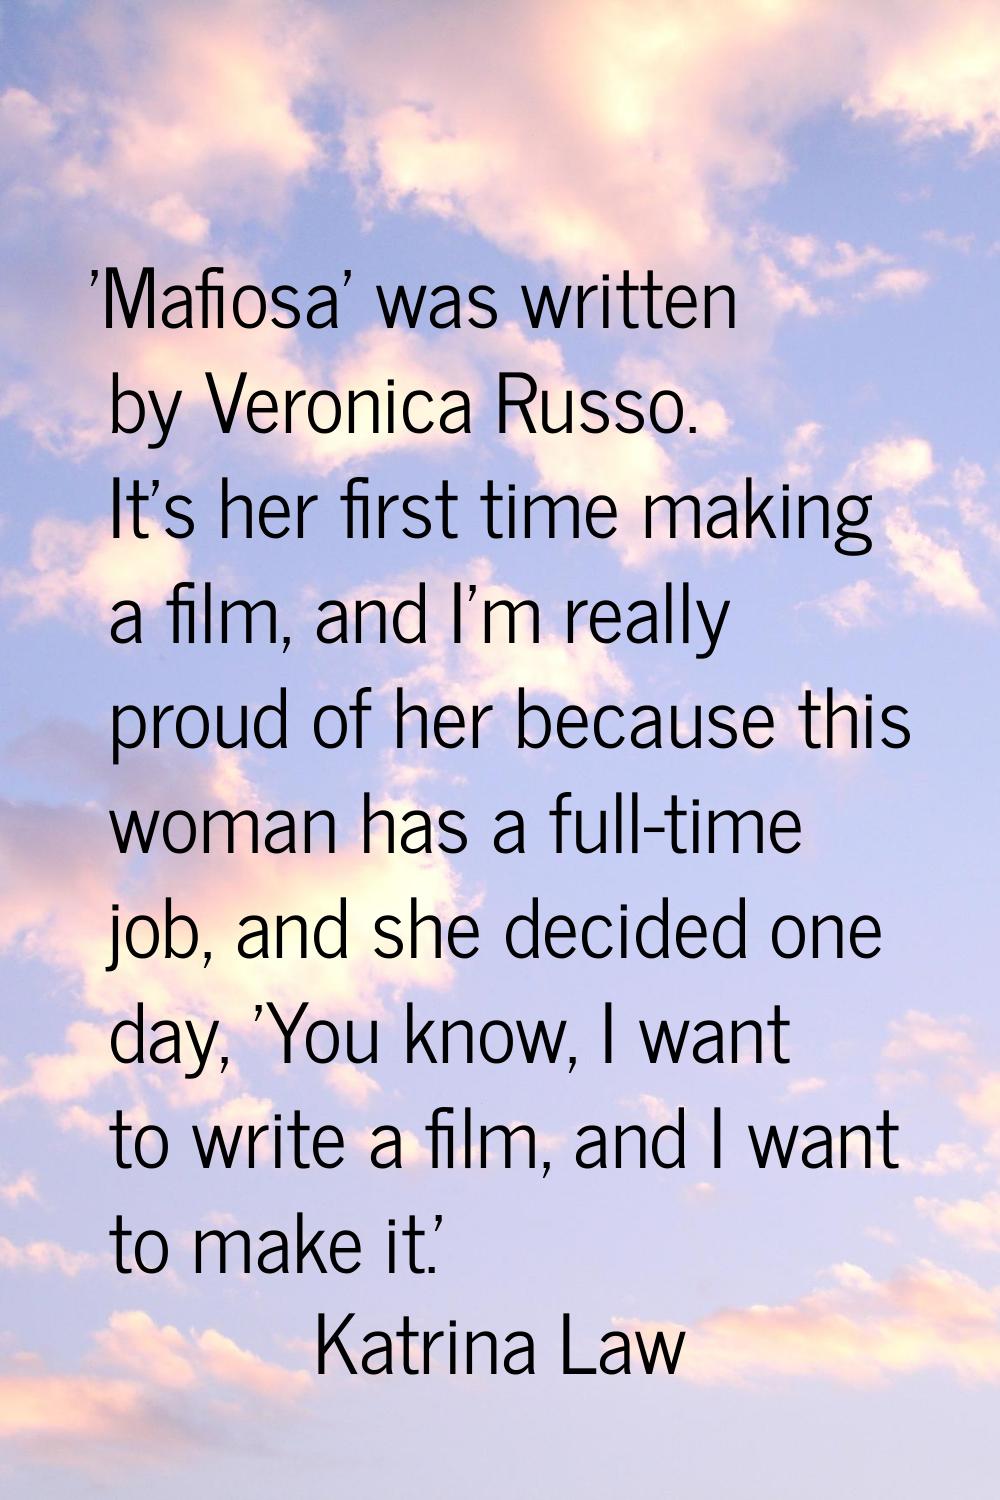 'Mafiosa' was written by Veronica Russo. It's her first time making a film, and I'm really proud of